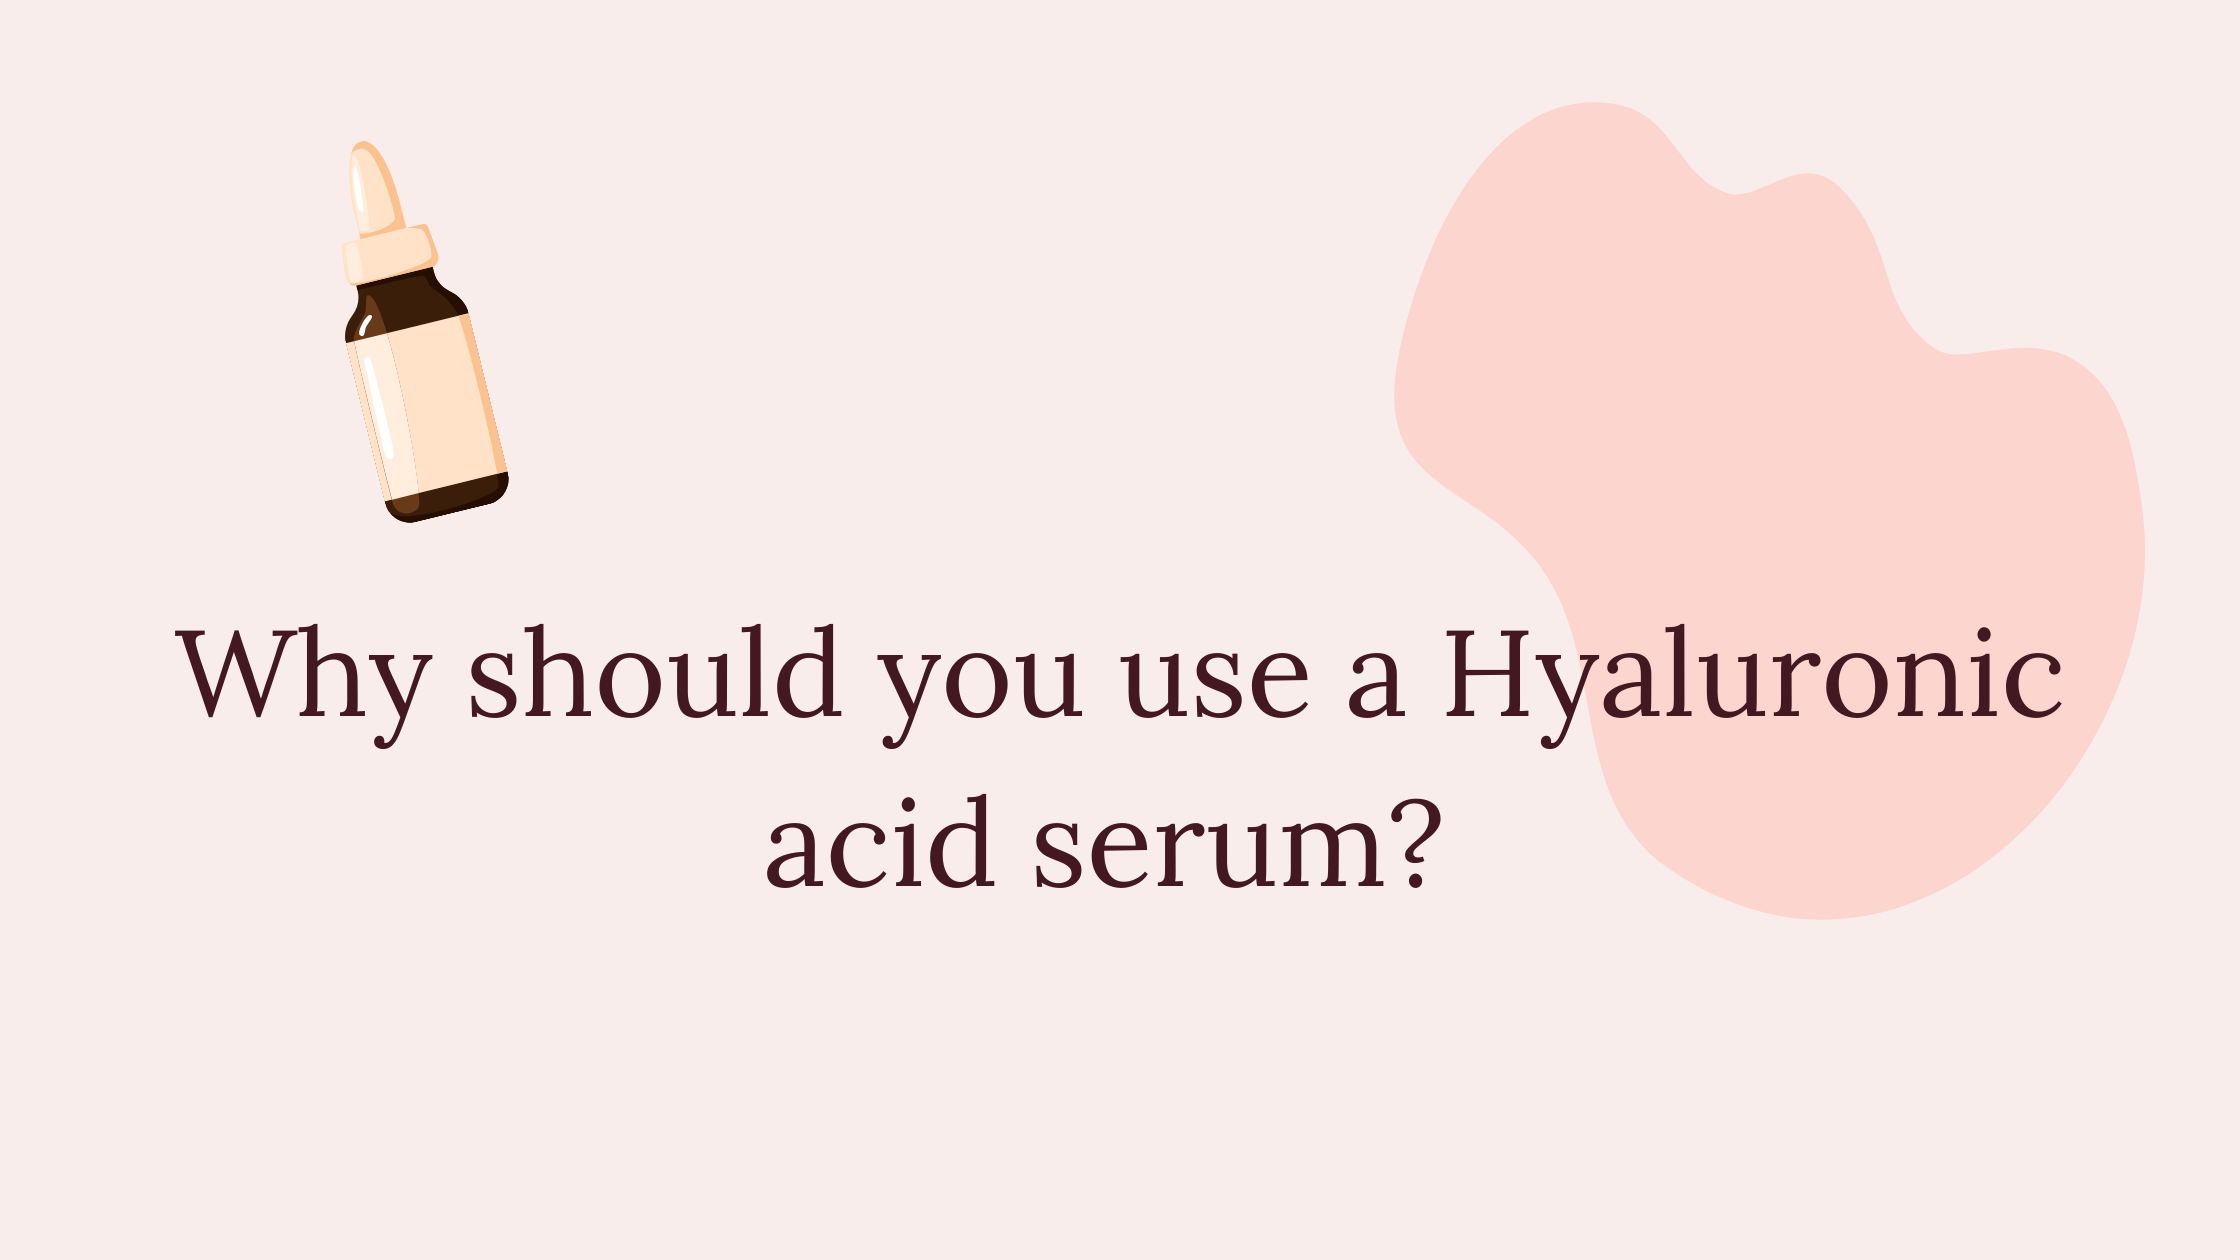 Why should you use a hyaluronic acid serum? 